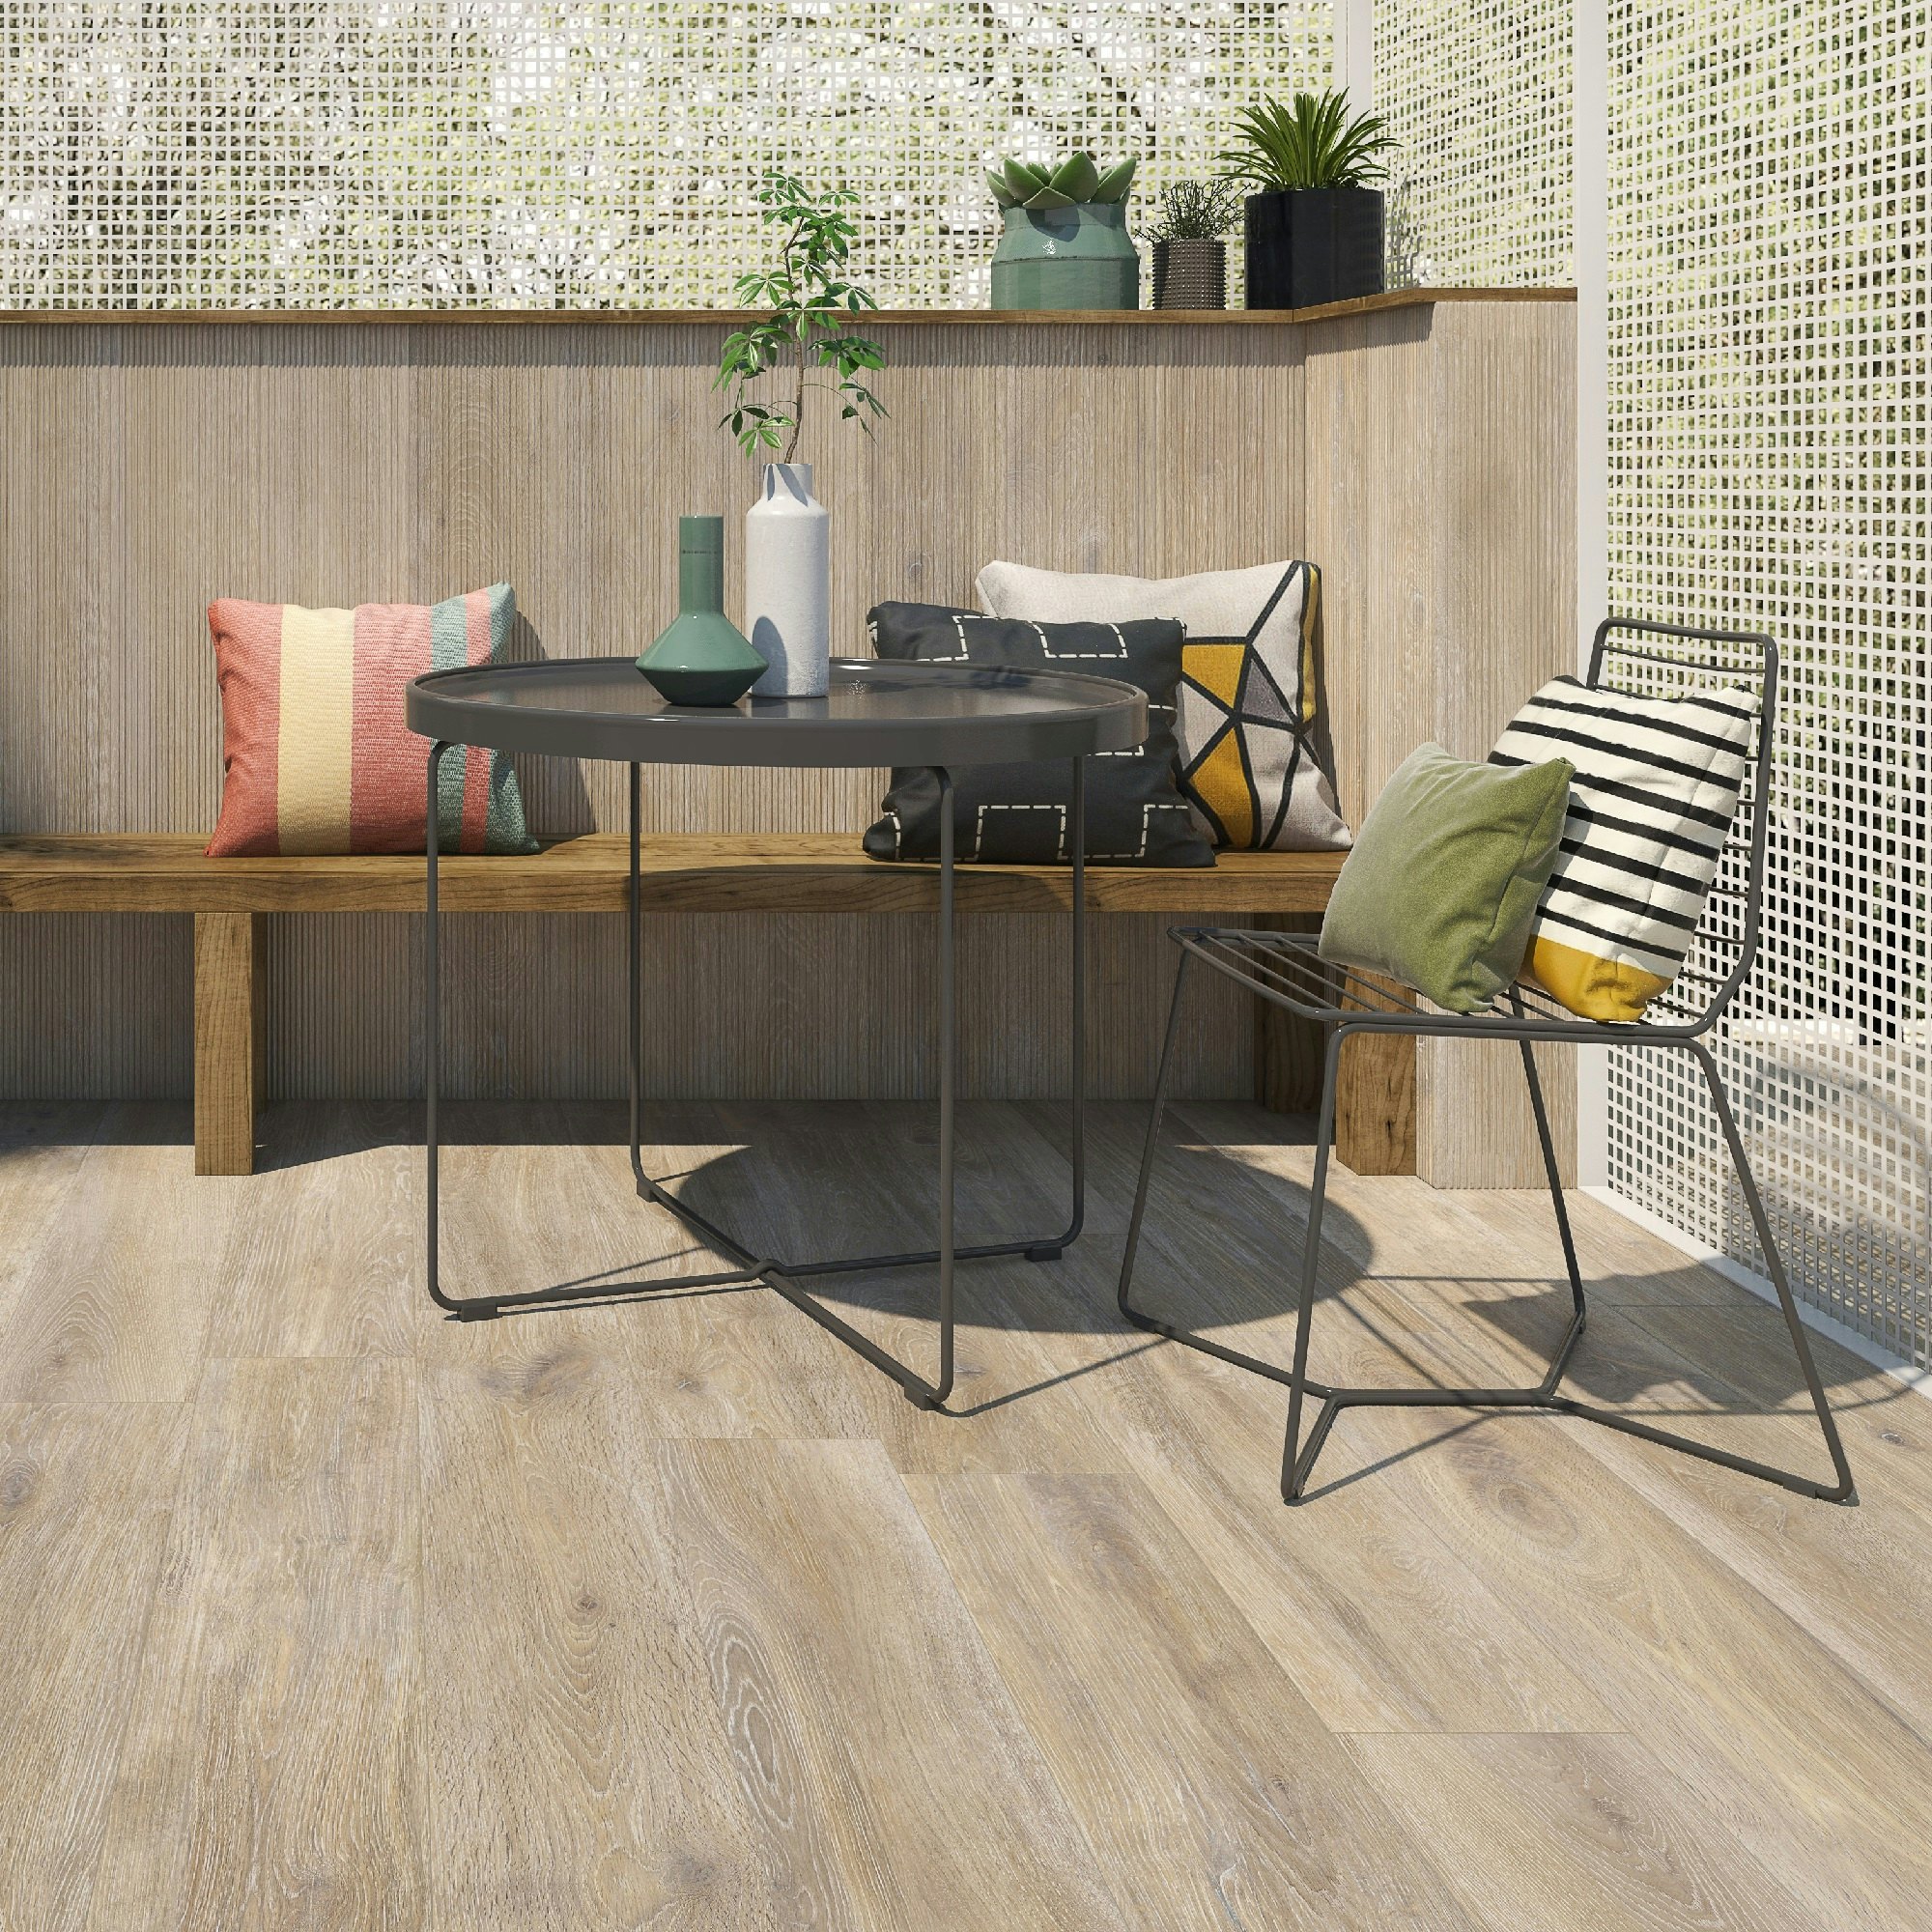 Chudleigh Natural Wood Effect Tile